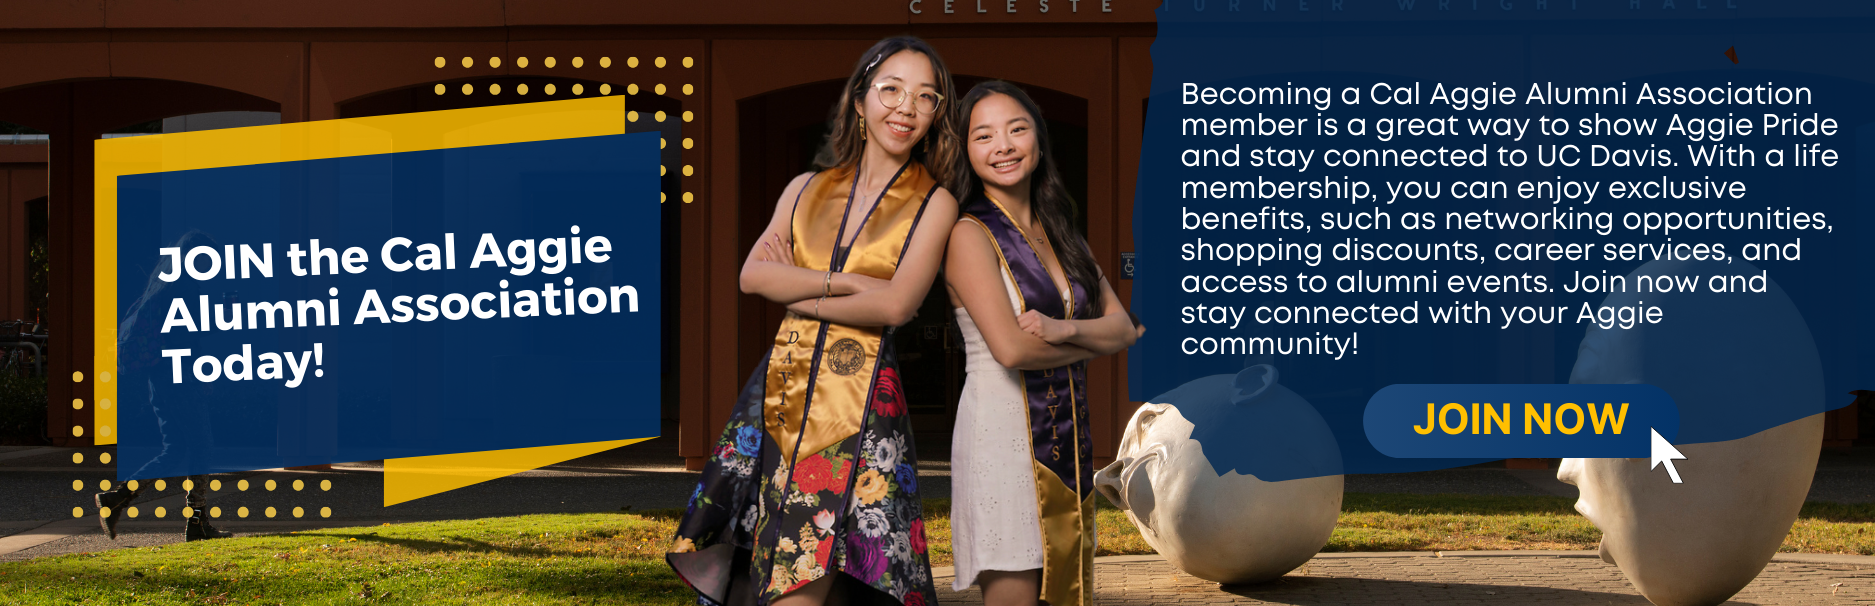 Become a member of the Cal Aggie Alumni Association!